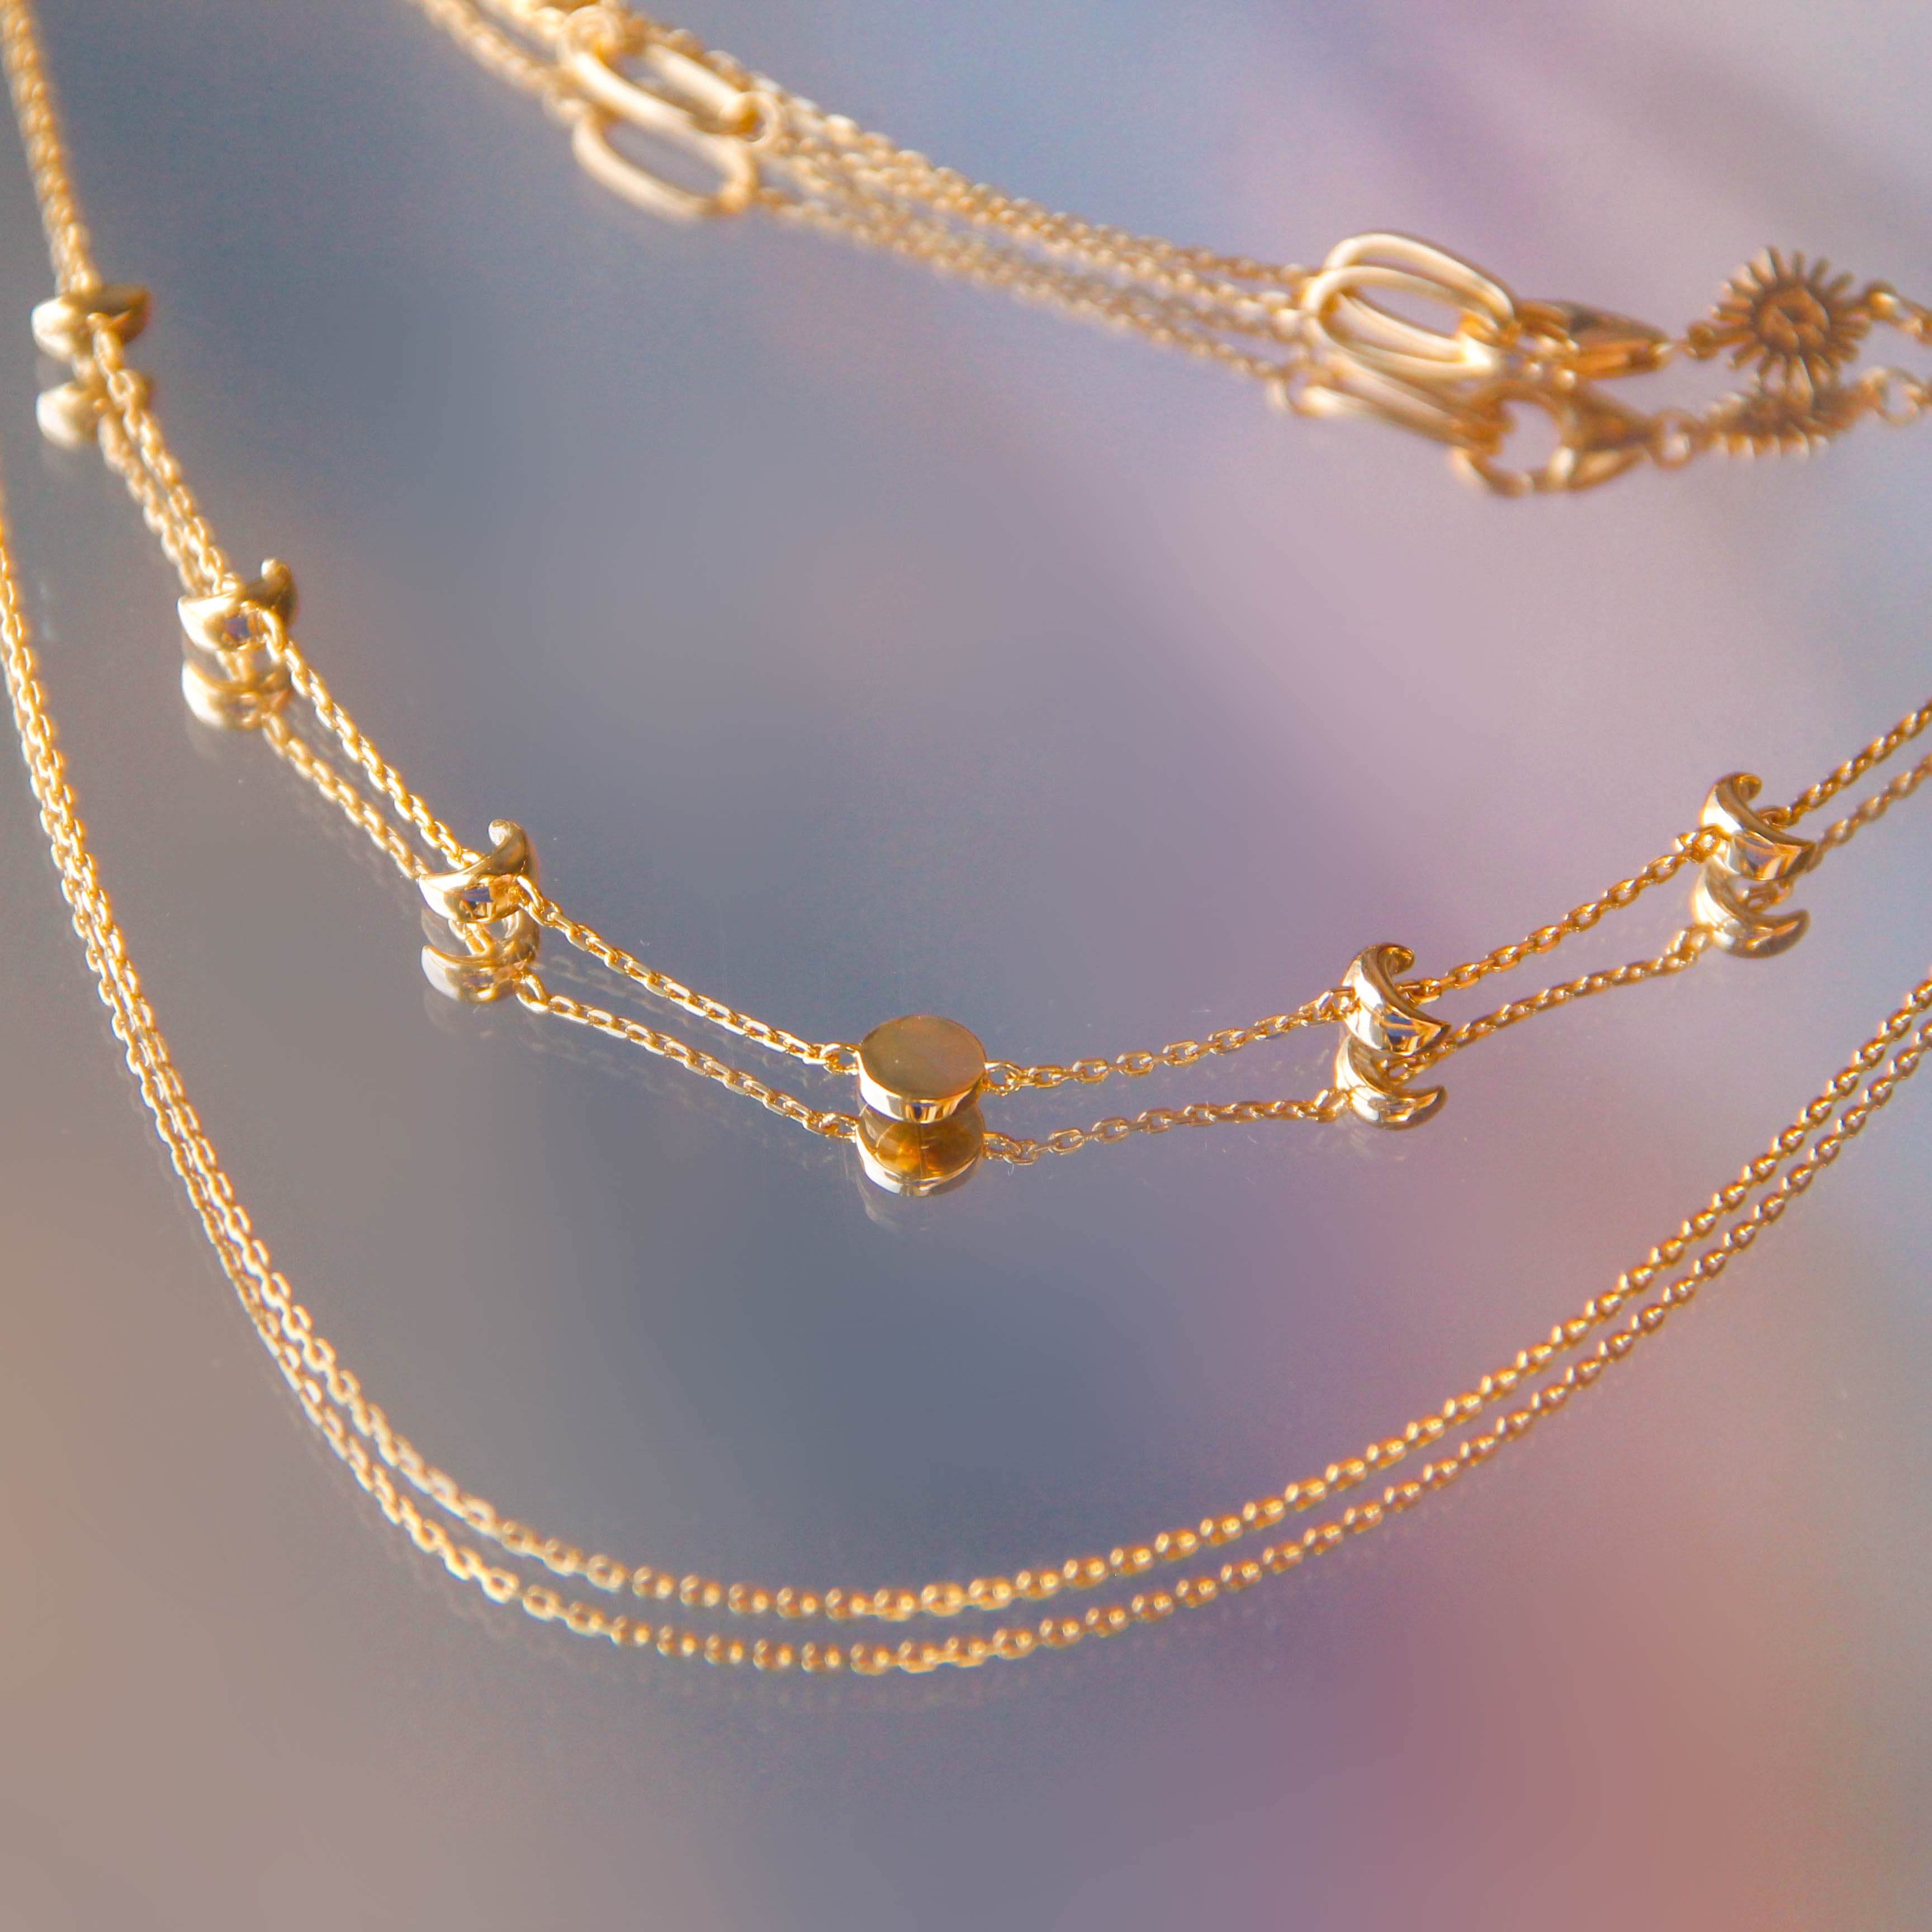 Gold Moon Phases Layered Necklace Chain | LOVE BY THE MOON